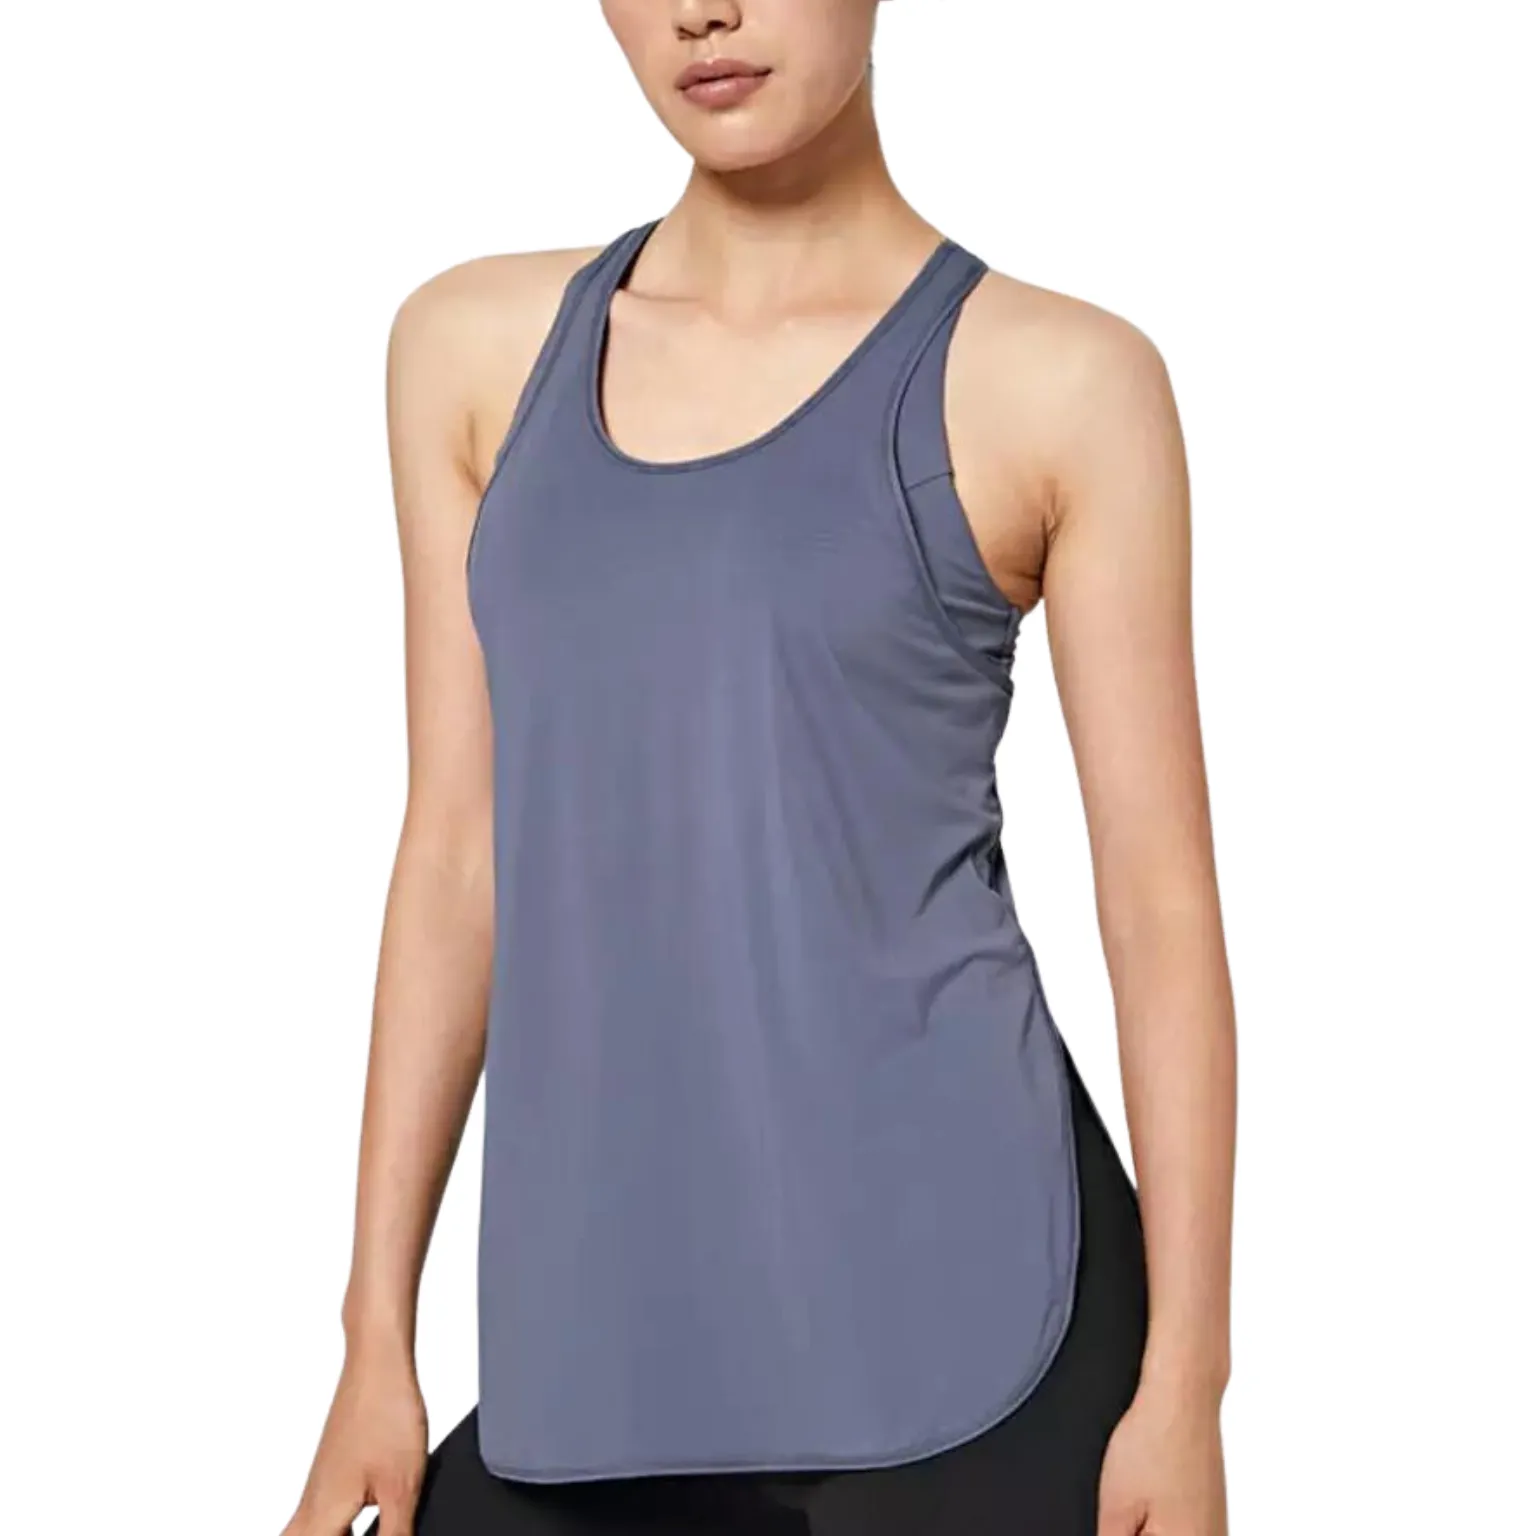 Training Tank Top manufacturing with trendy design